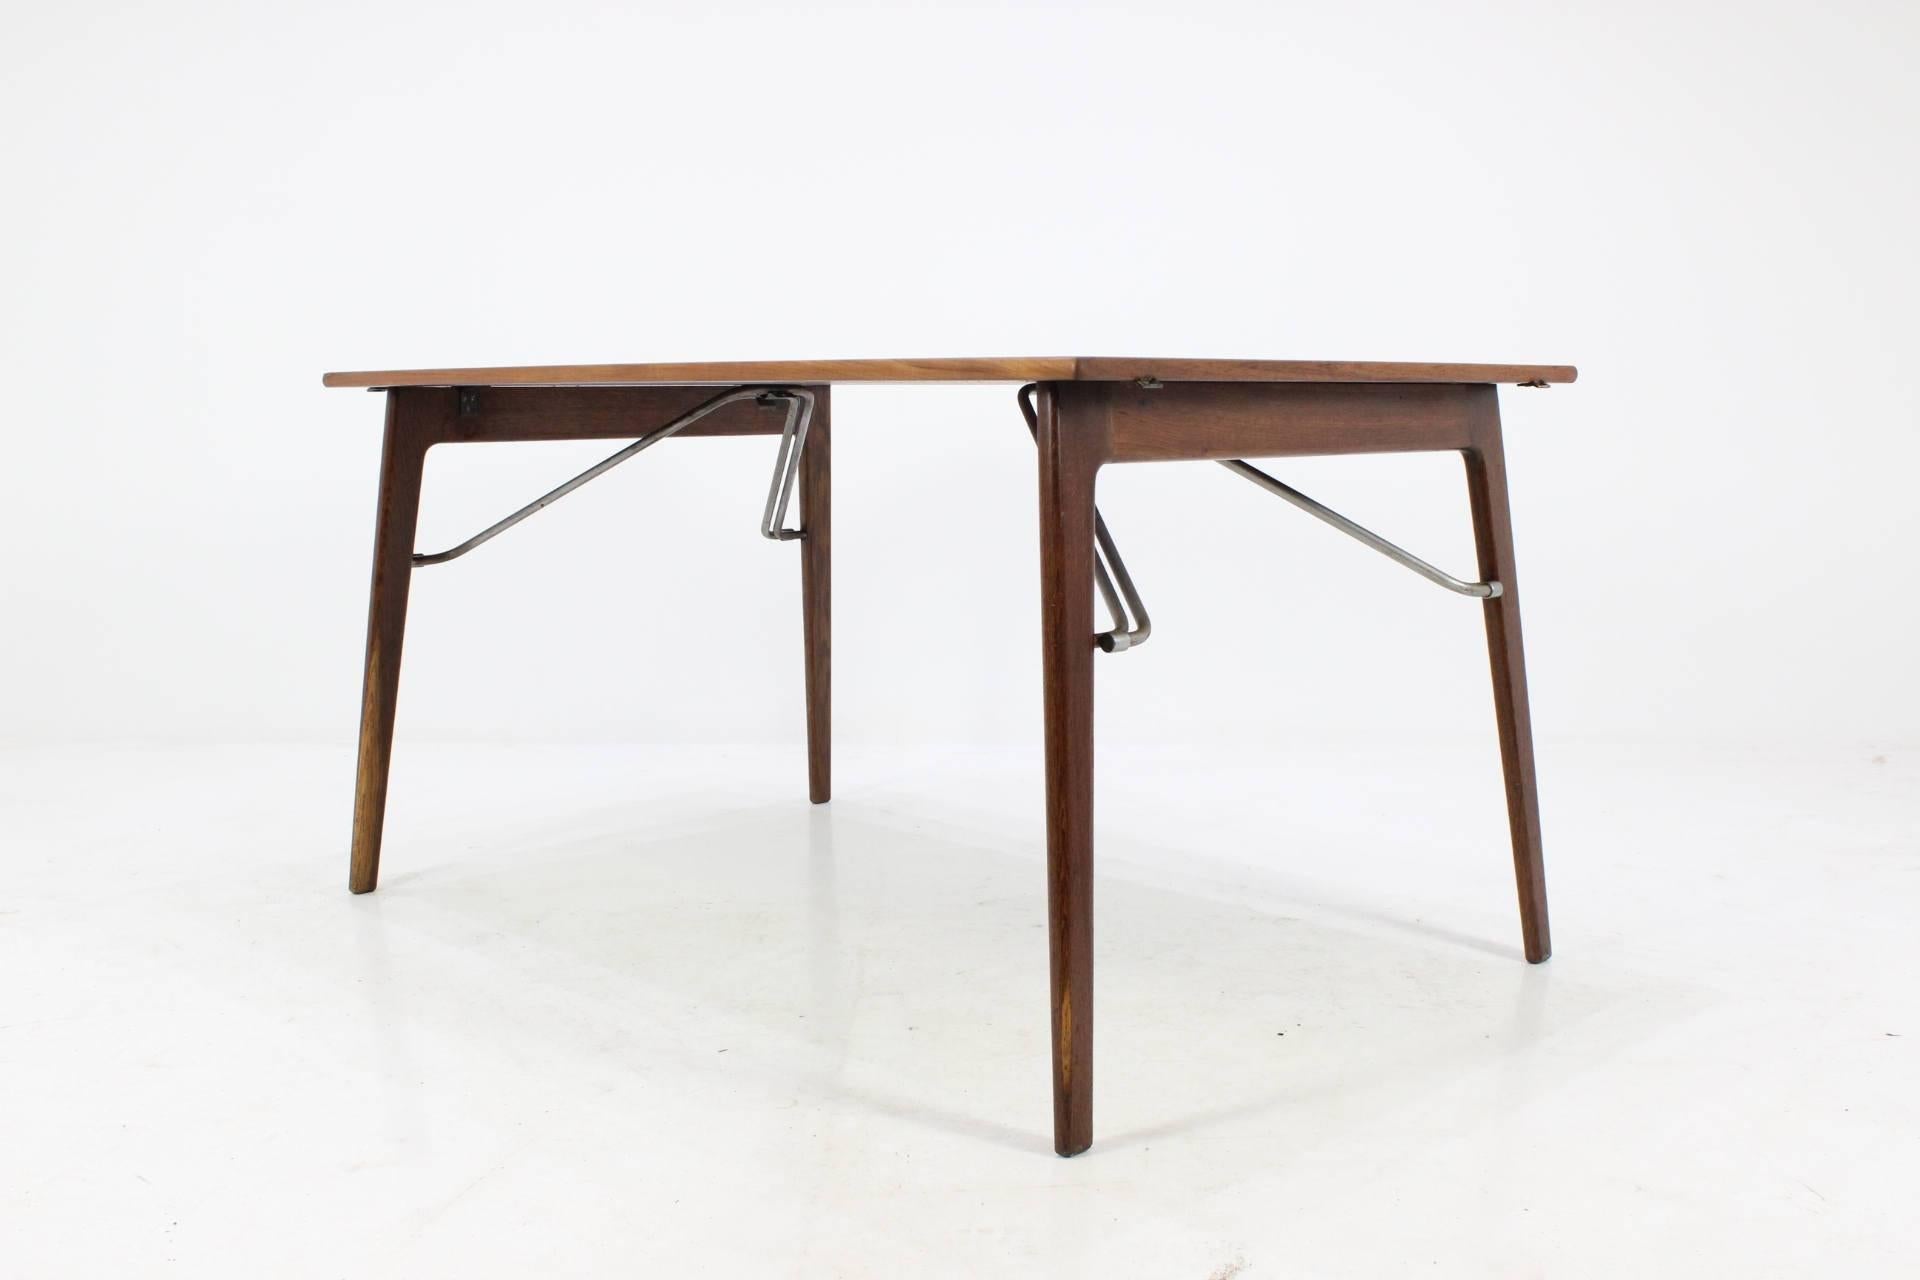 Leaf teak dining table by Børge Mogensen for Søborg Møbelfabrik. Rarely did Mogensen use steel as a featured material for his designs but with this particular piece, we see it used in the drop leaf supports. A desk and another variation of this